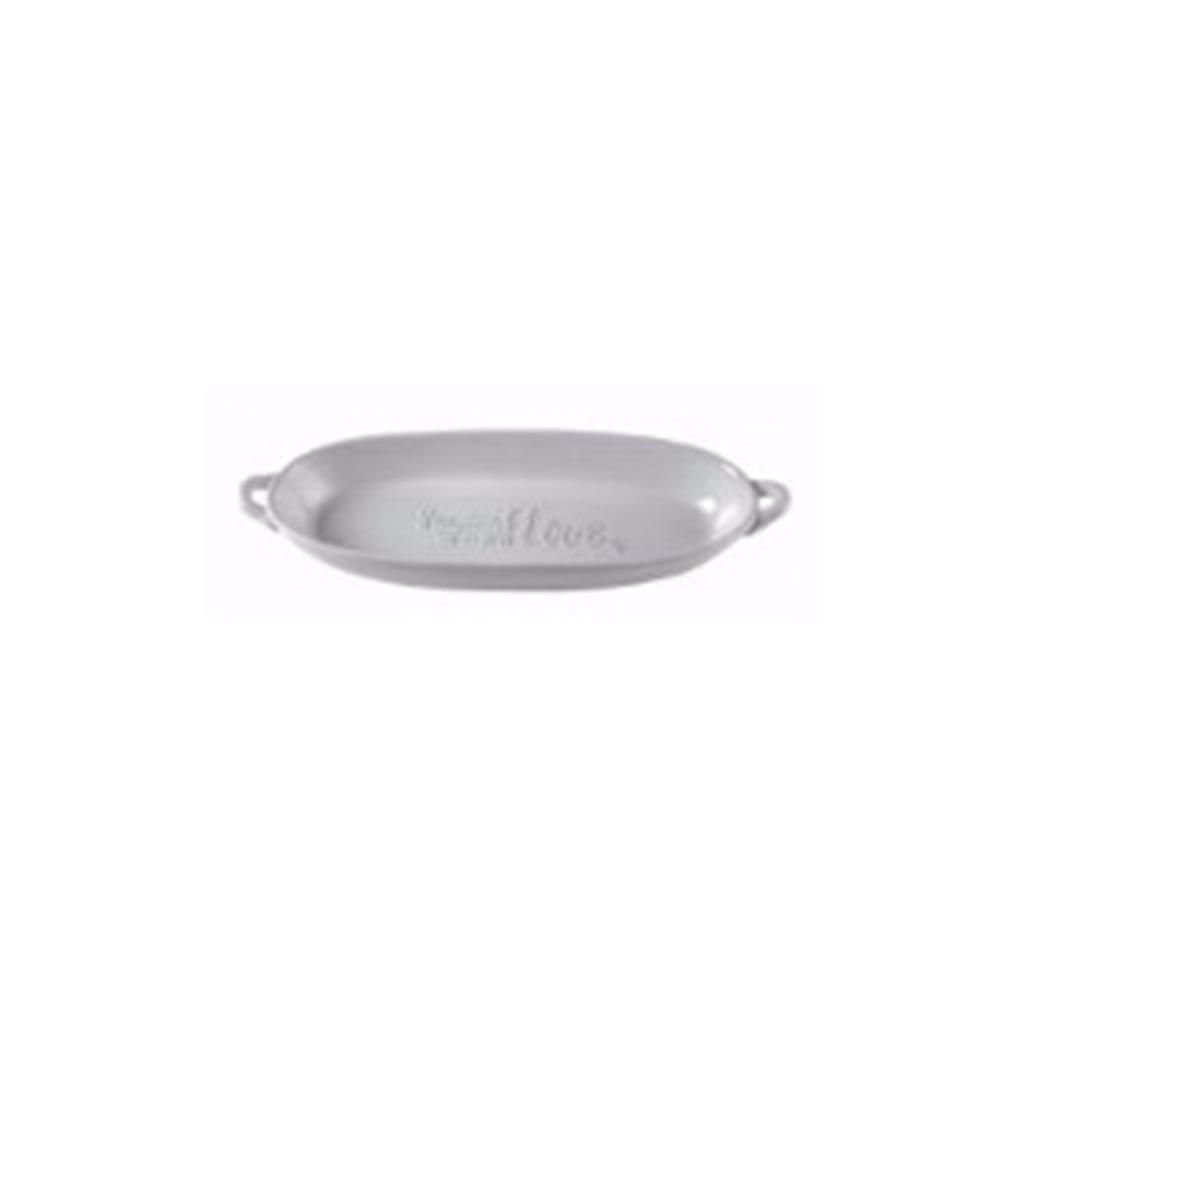 135592 15 X 5.75 In. Oval Serving Dish - Seasoned With Love